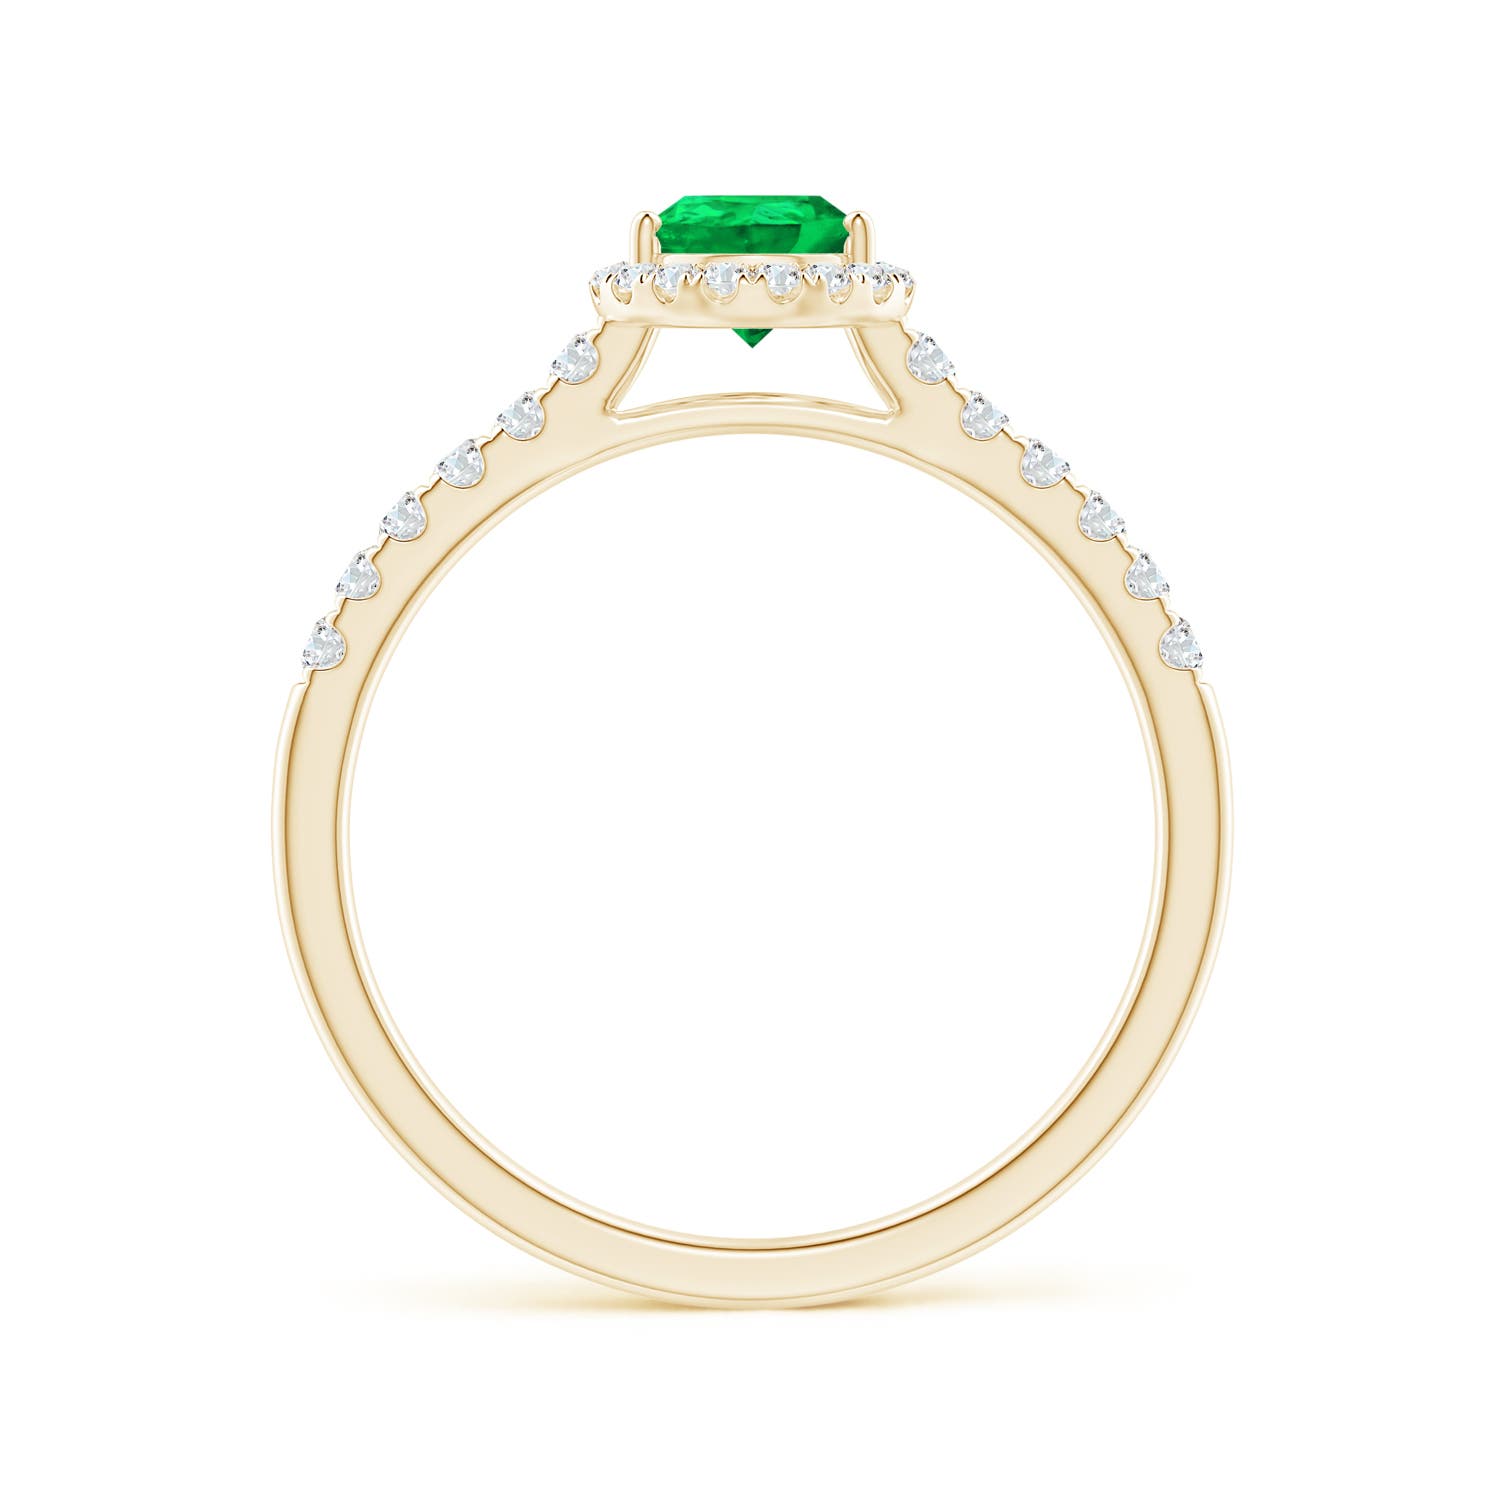 AAA - Emerald / 0.88 CT / 14 KT Yellow Gold